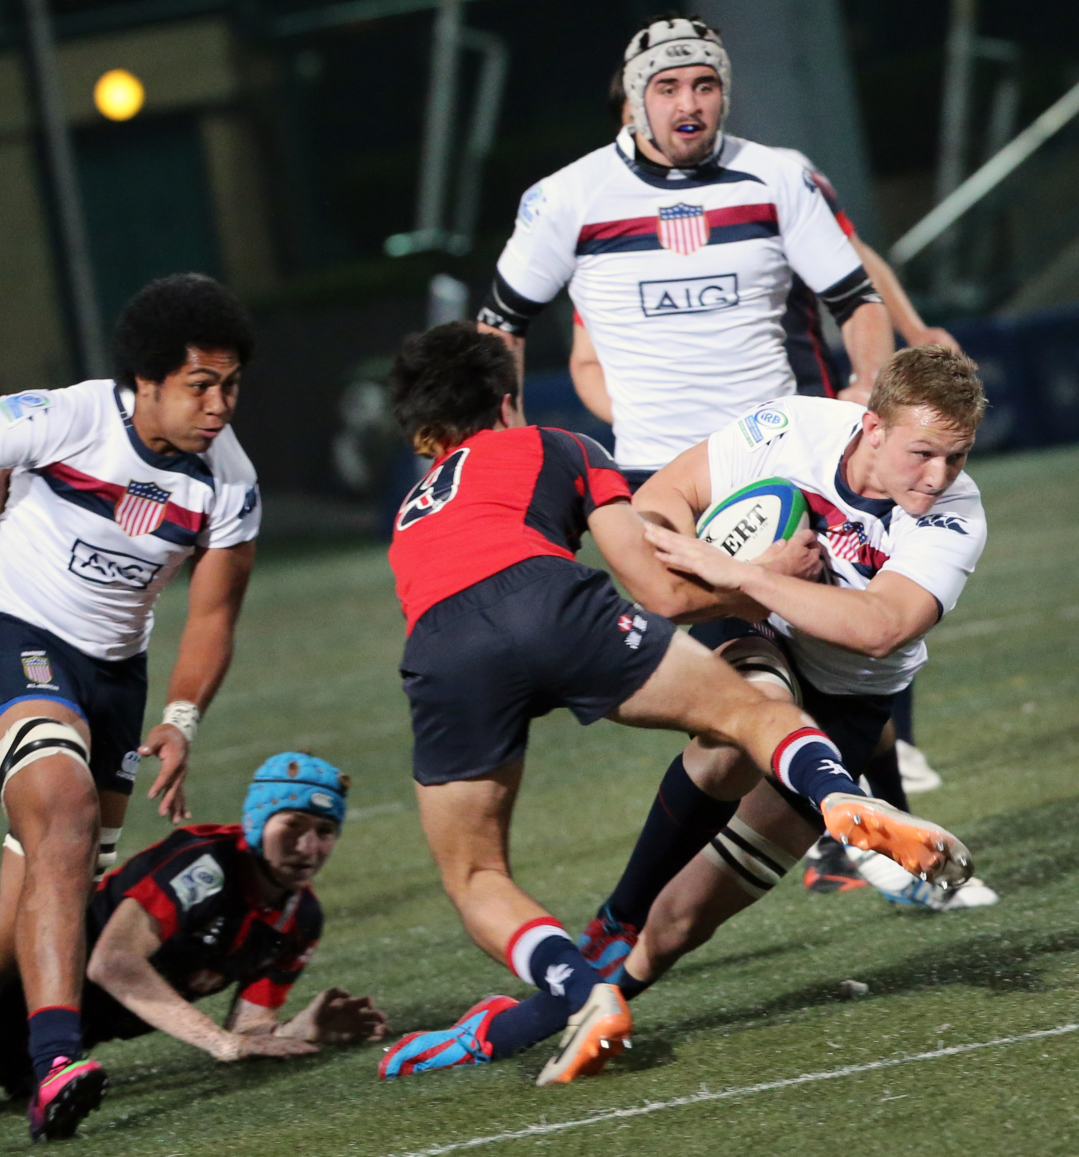 Hong Kong half-back James Christie puts his body on the line against the United States earlier in the IRB under-20s tournament. Photo: KY Cheng/SCMP